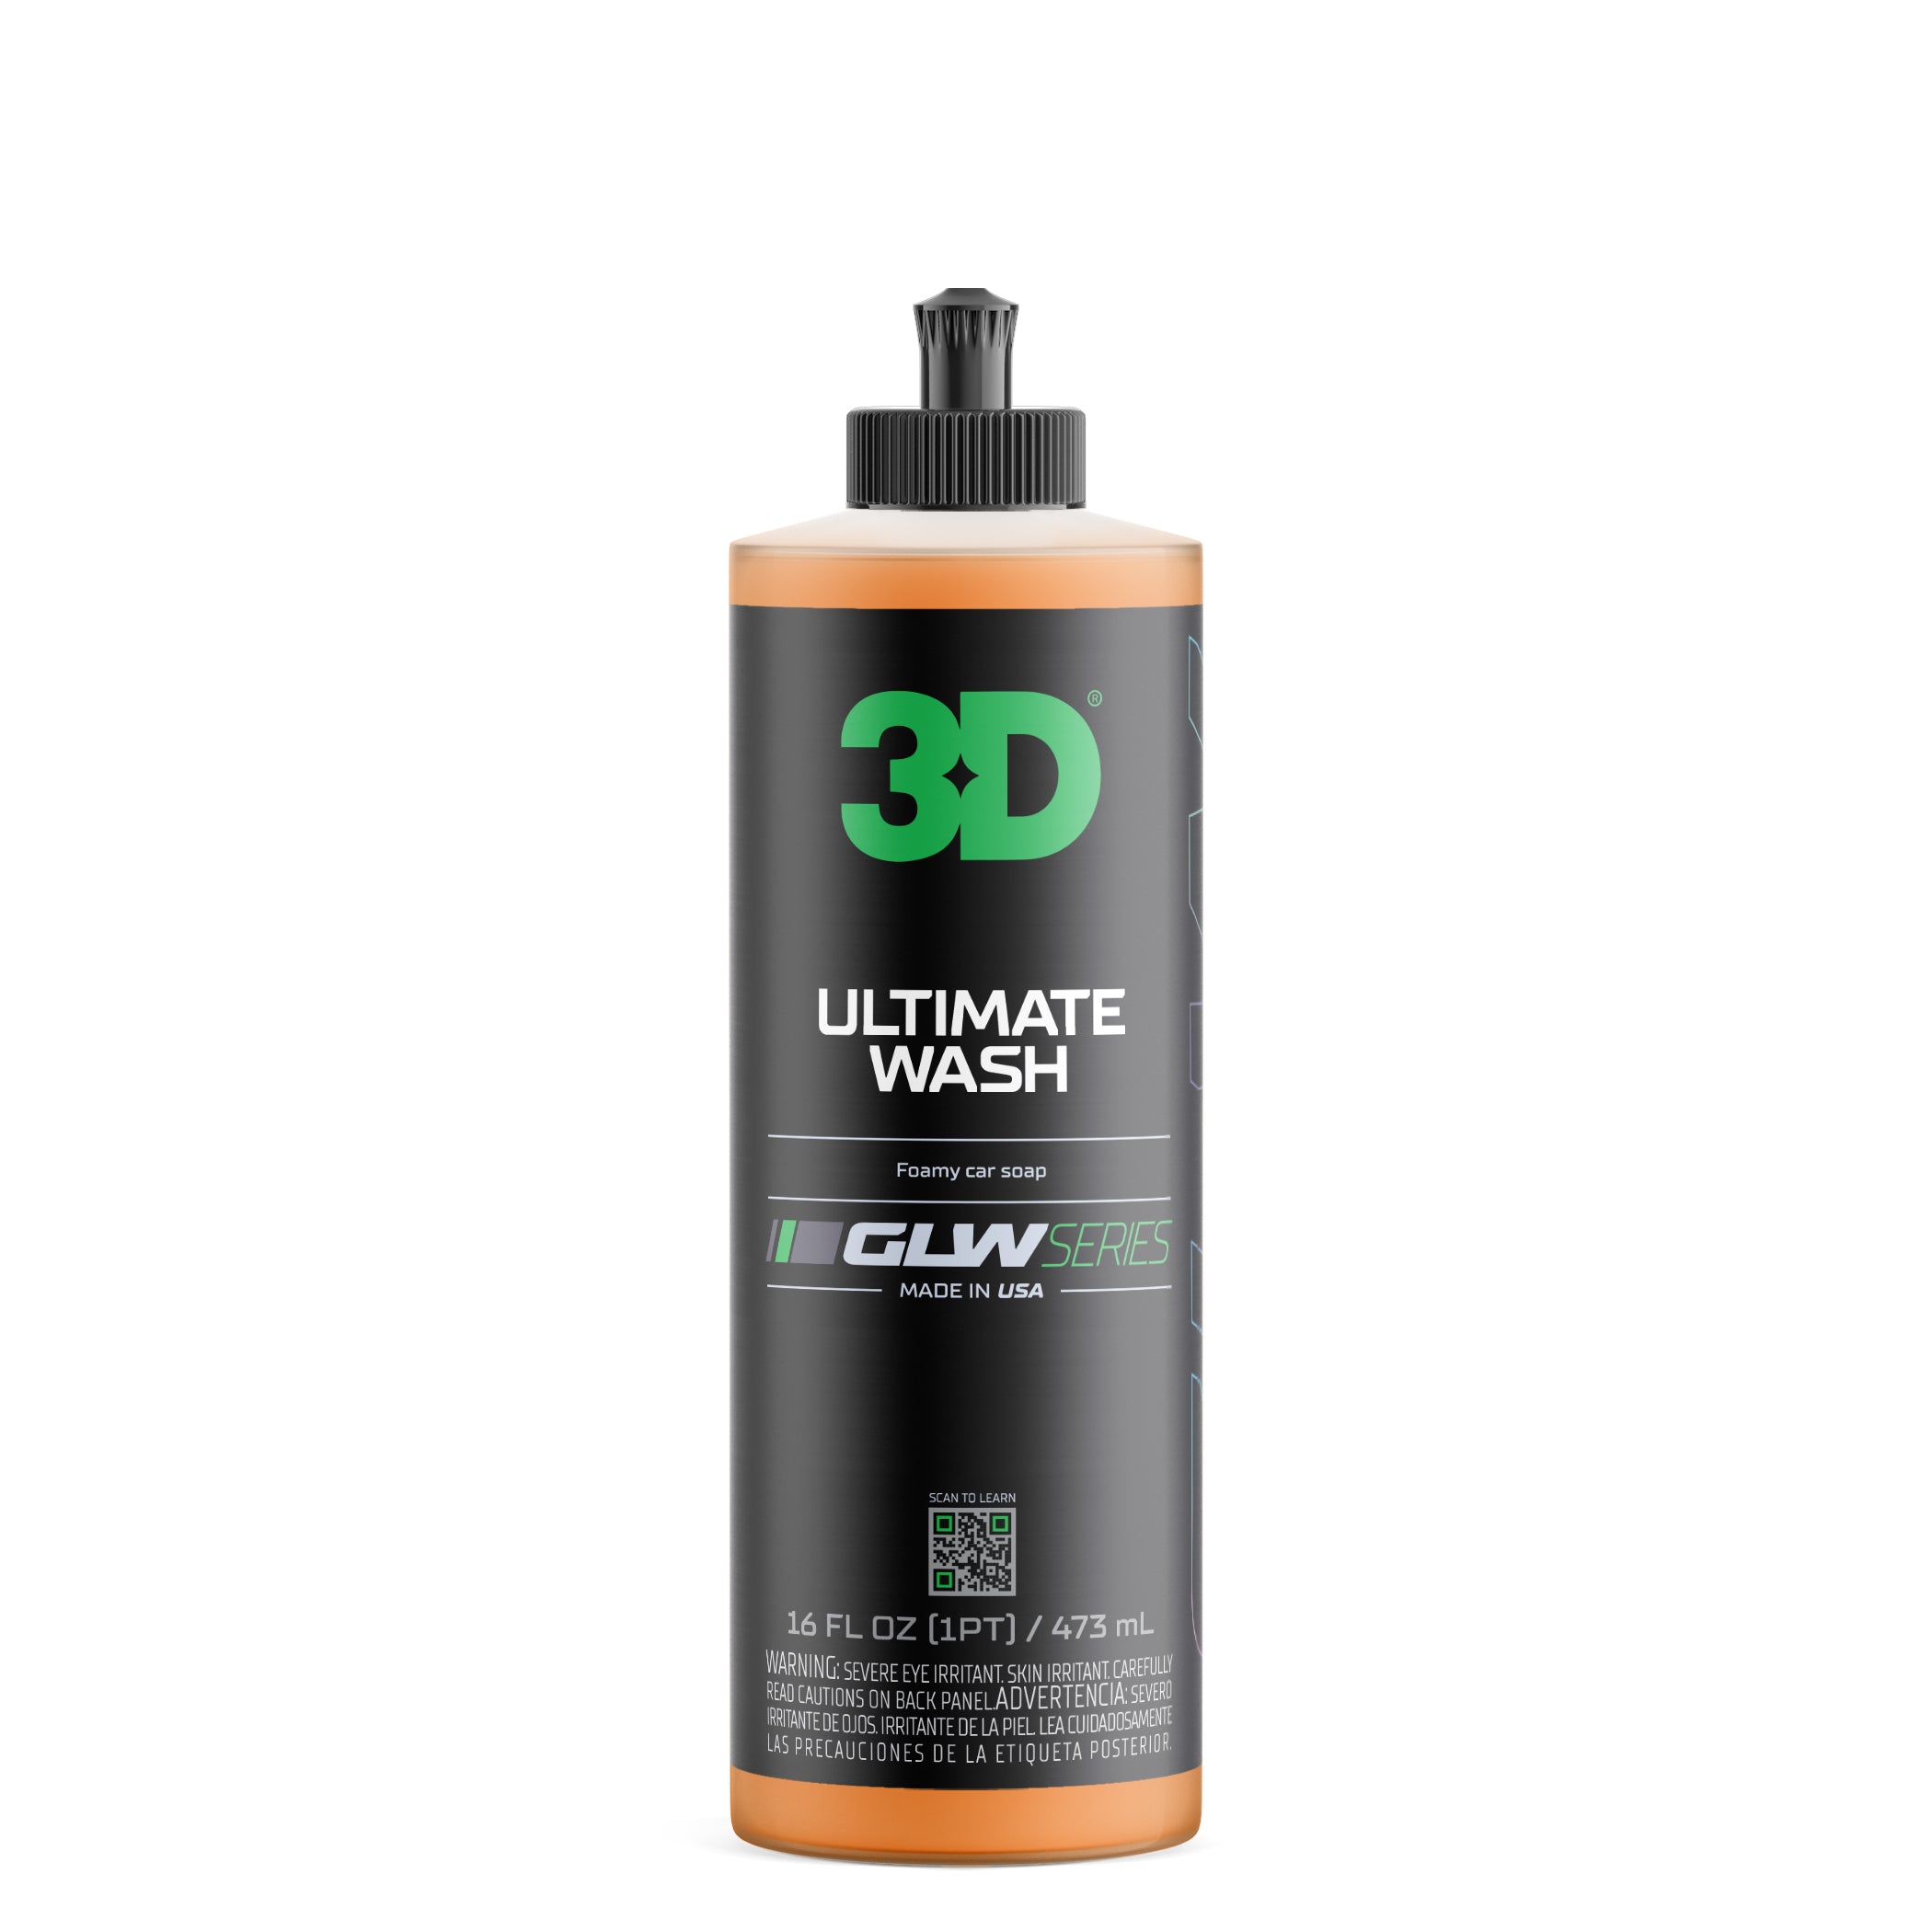 3D Glw Series Ultimate Wash - 16 oz